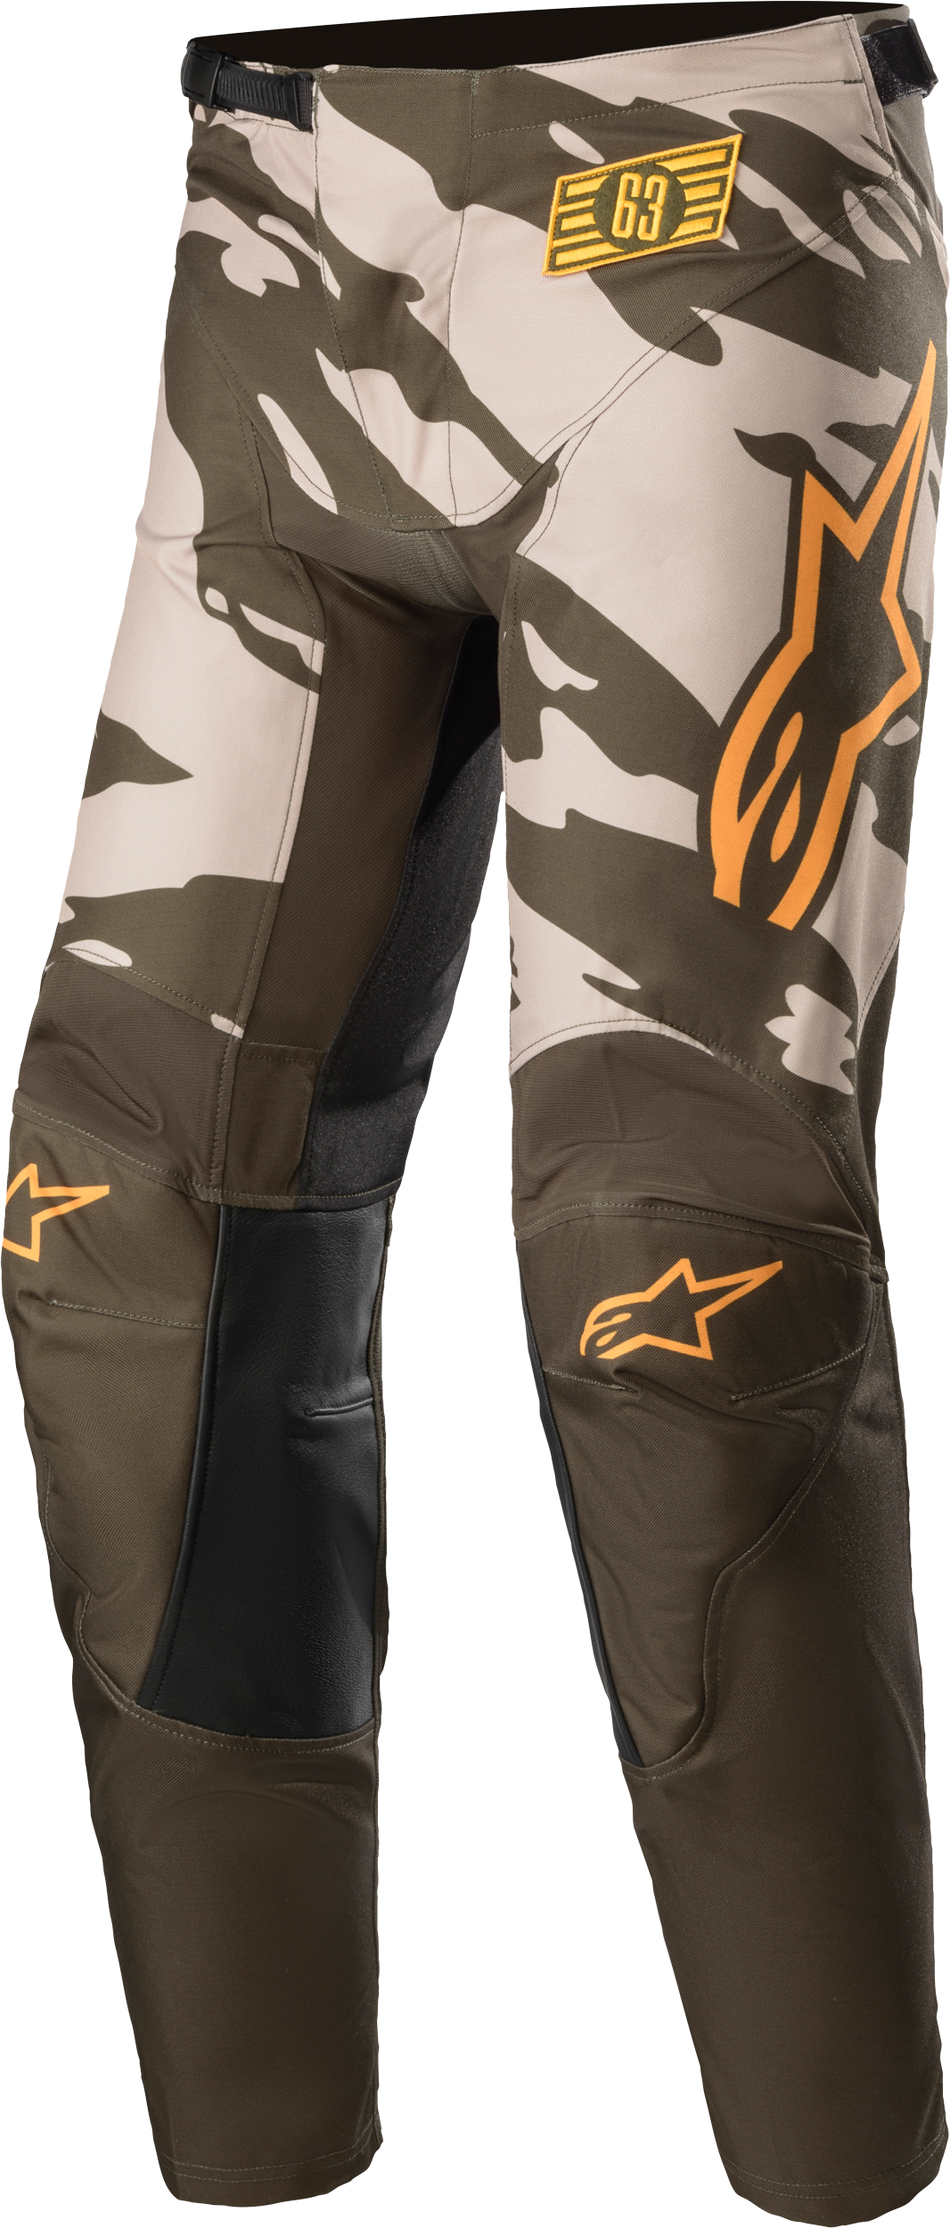 ALPINESTARS Youth Racer Tactical Pants Mltry/Sand Camo/Tange Sz 28 3741222-6840-28